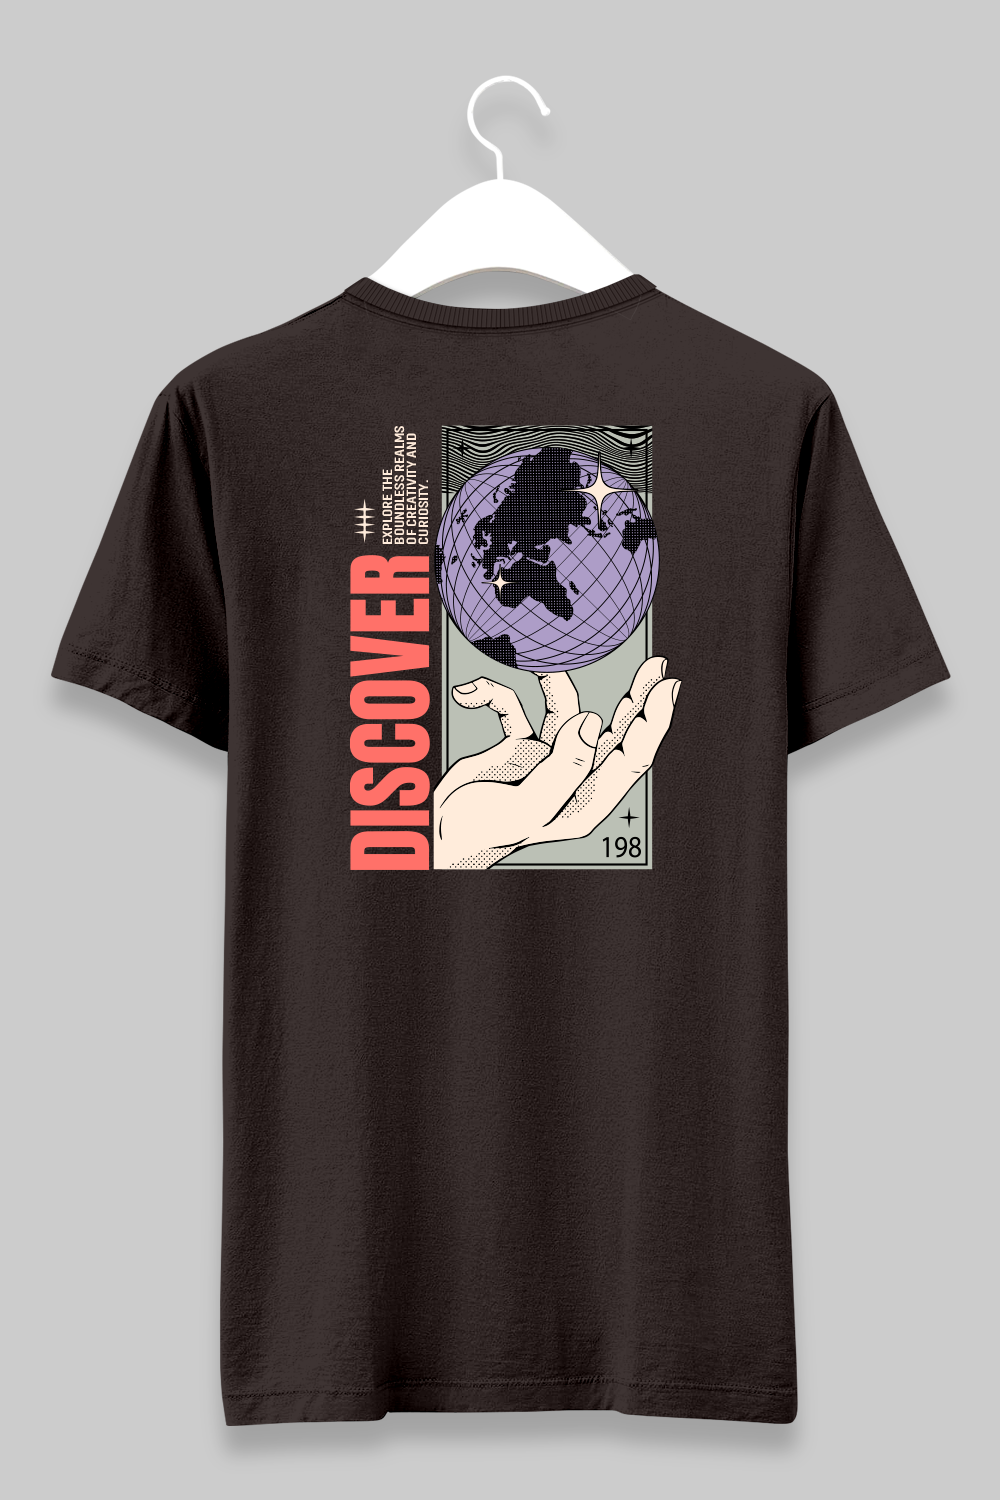 Discover Charcoal Grey Unisex T-shirt